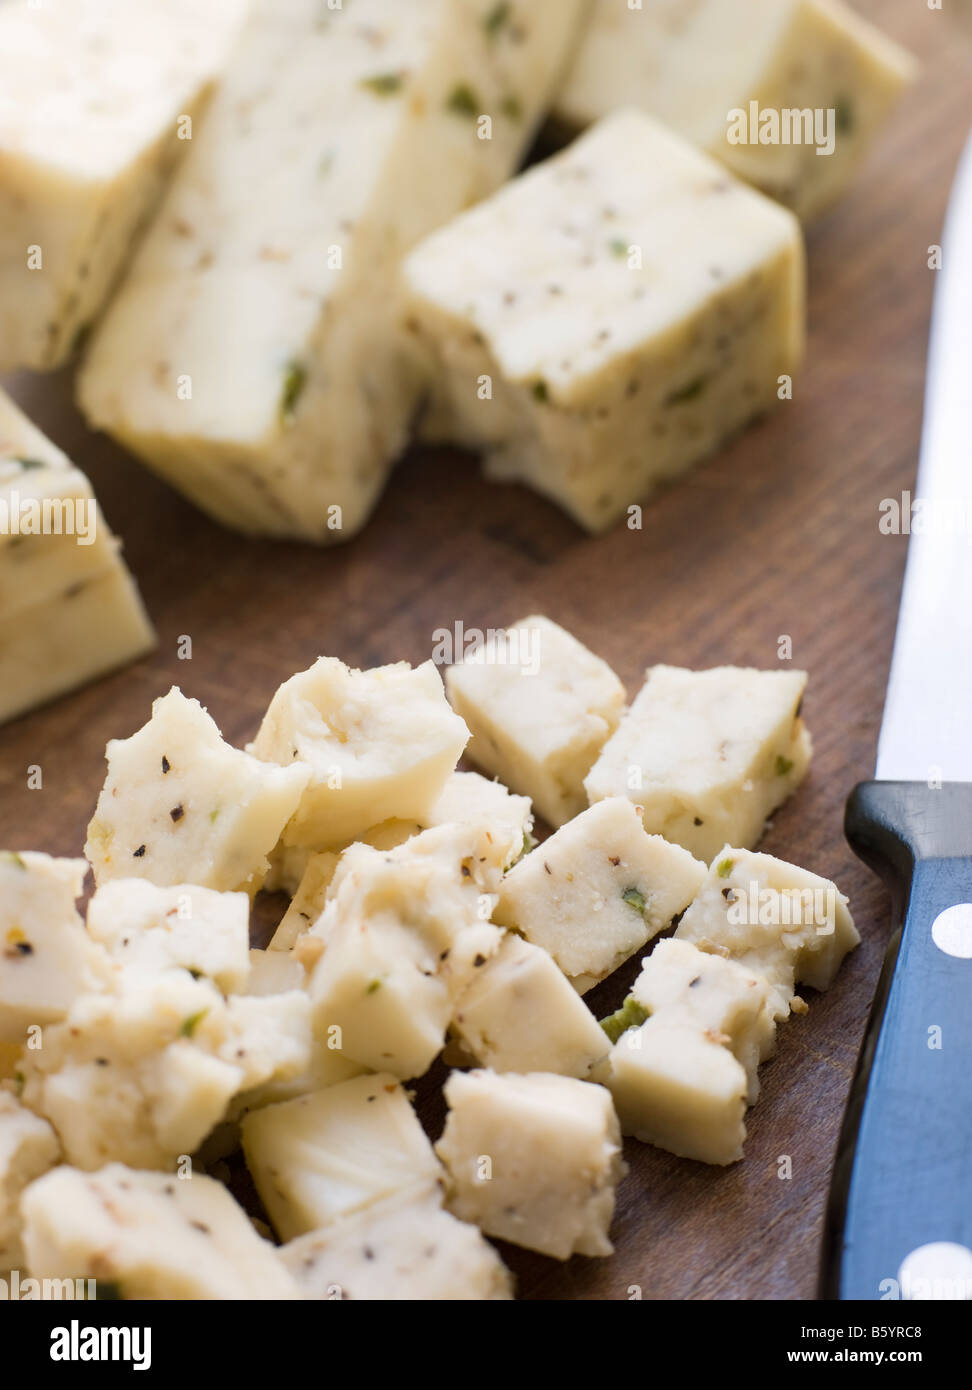 Pieces of Paneer Cheese with Spices Stock Photo